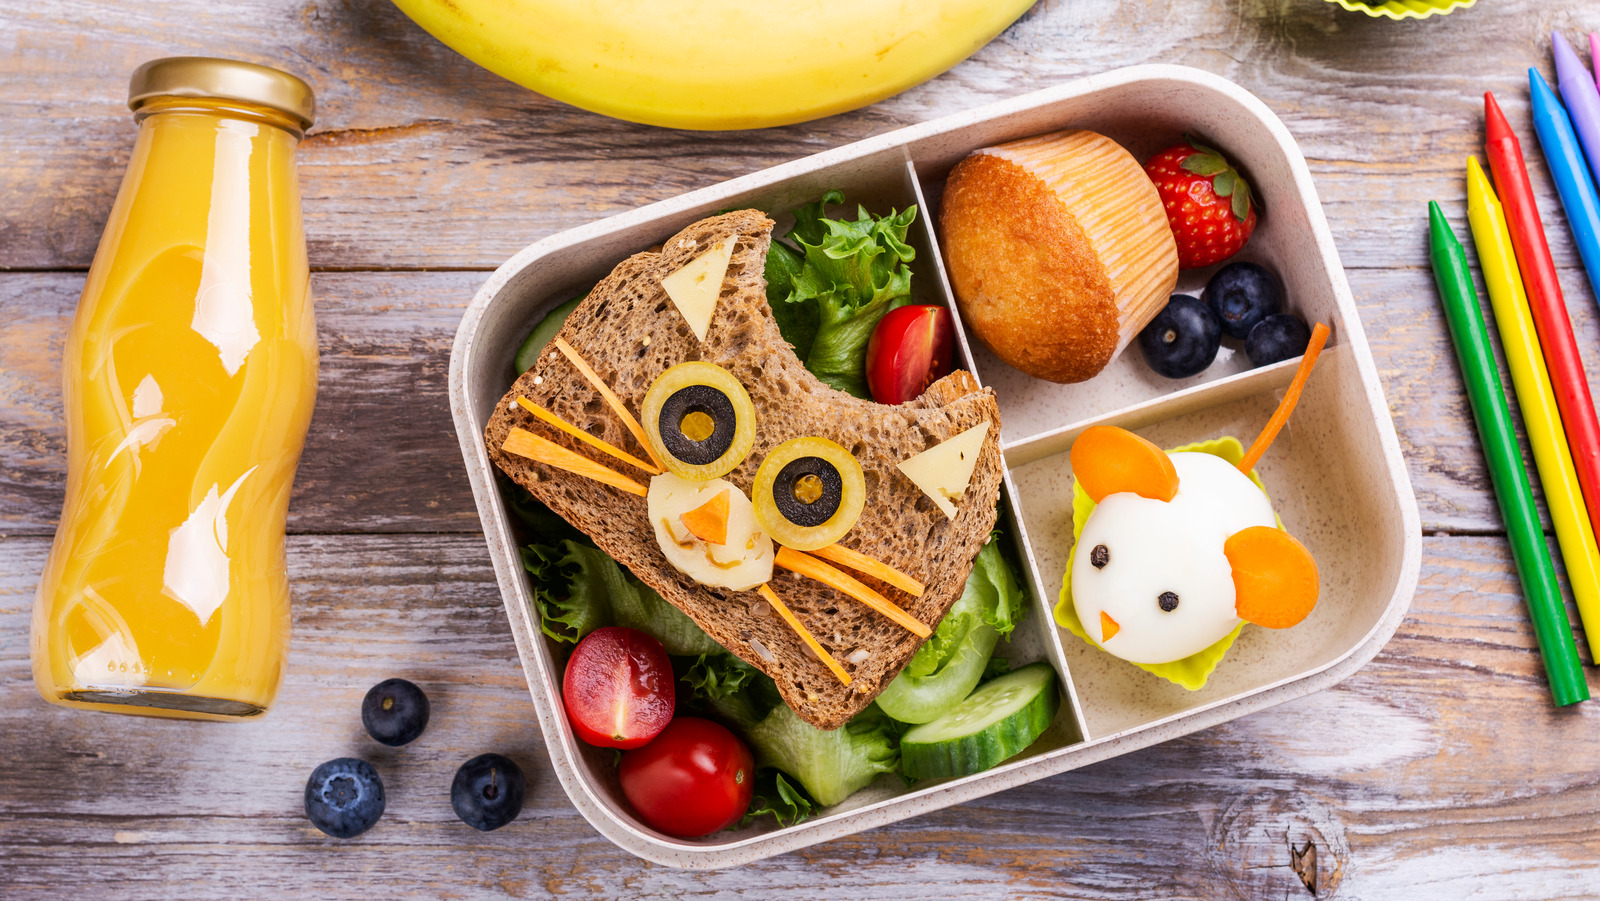 Bento Box: The Traditional Japanese Lunch Box That Is Both Healthy